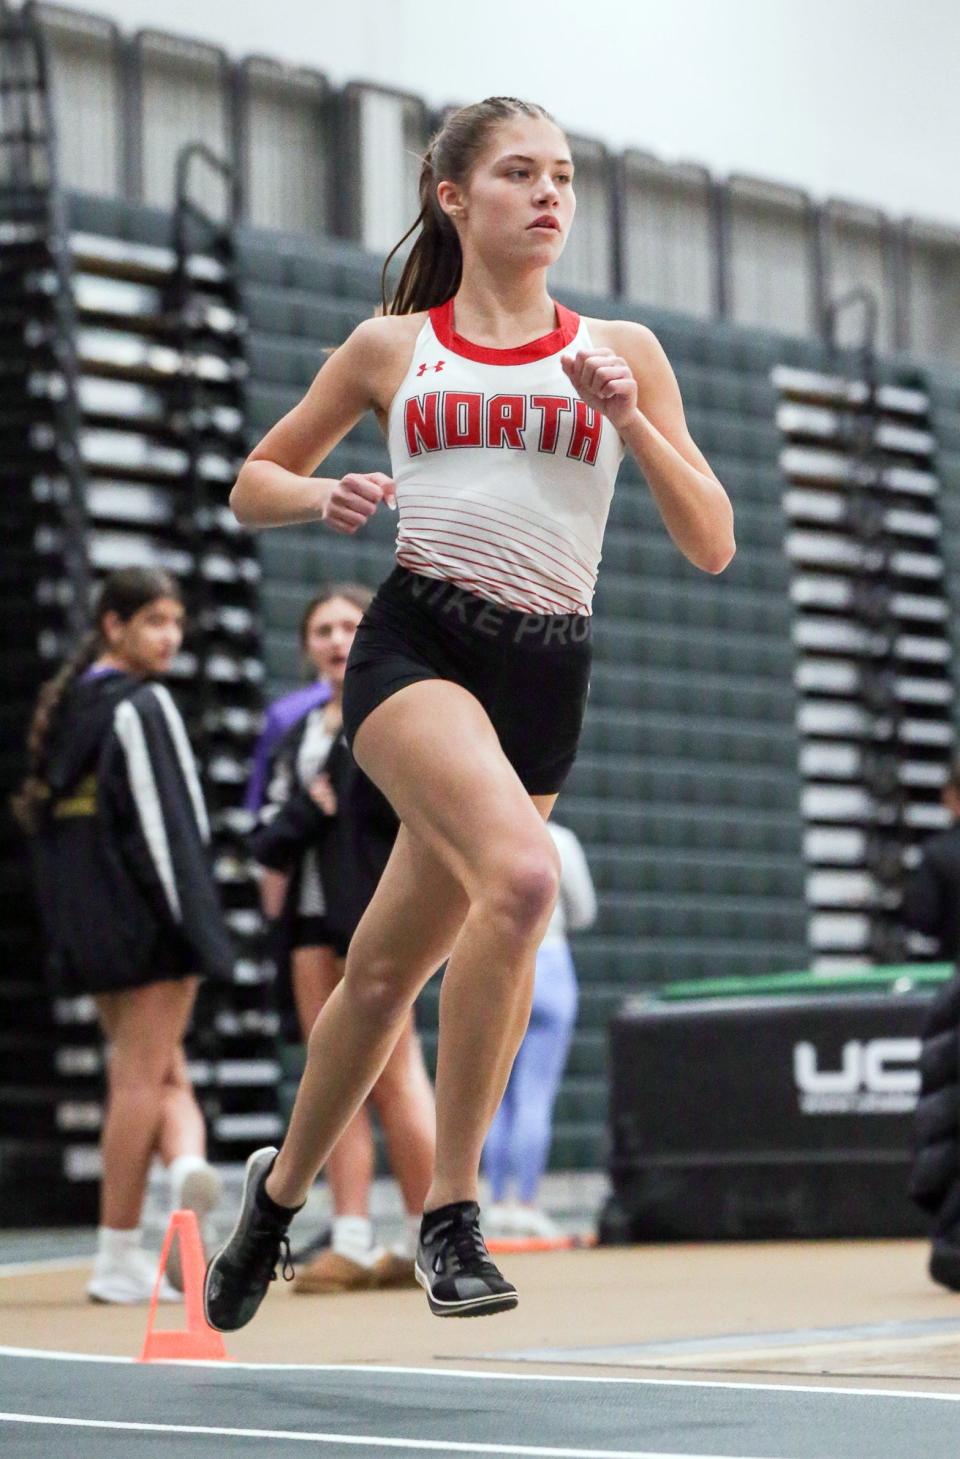 North Hagerstown's Lauren Stine set a county meet record in the girls 3,200, winning in 11:17.24.